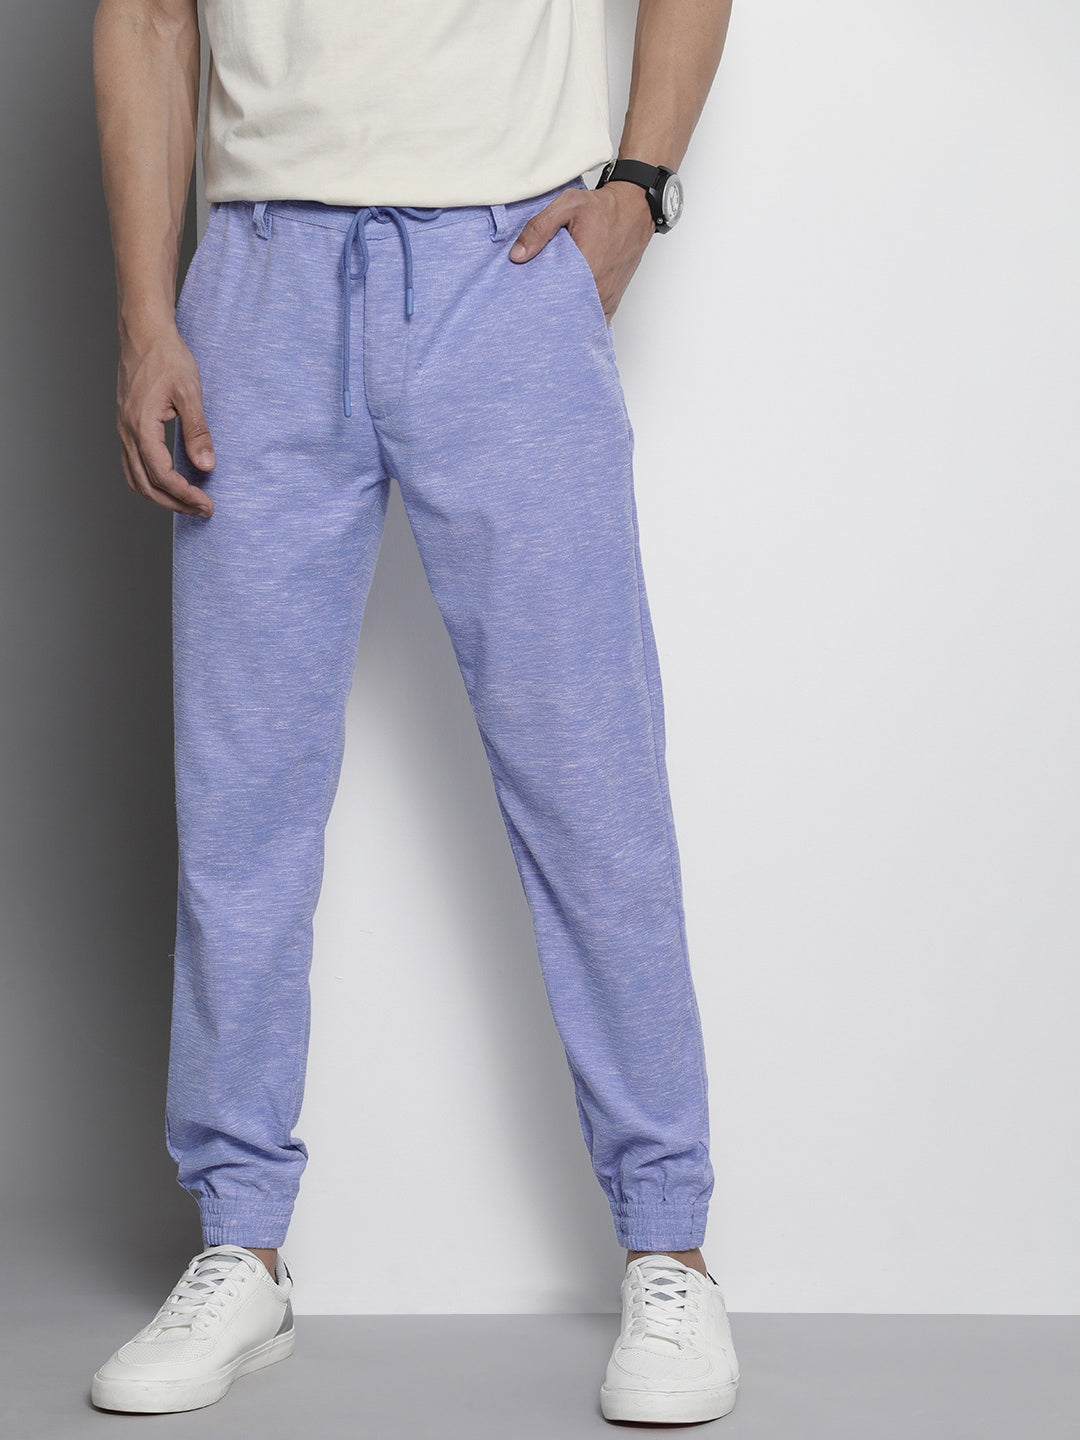 Blue Solid Joggers - 28 Blue